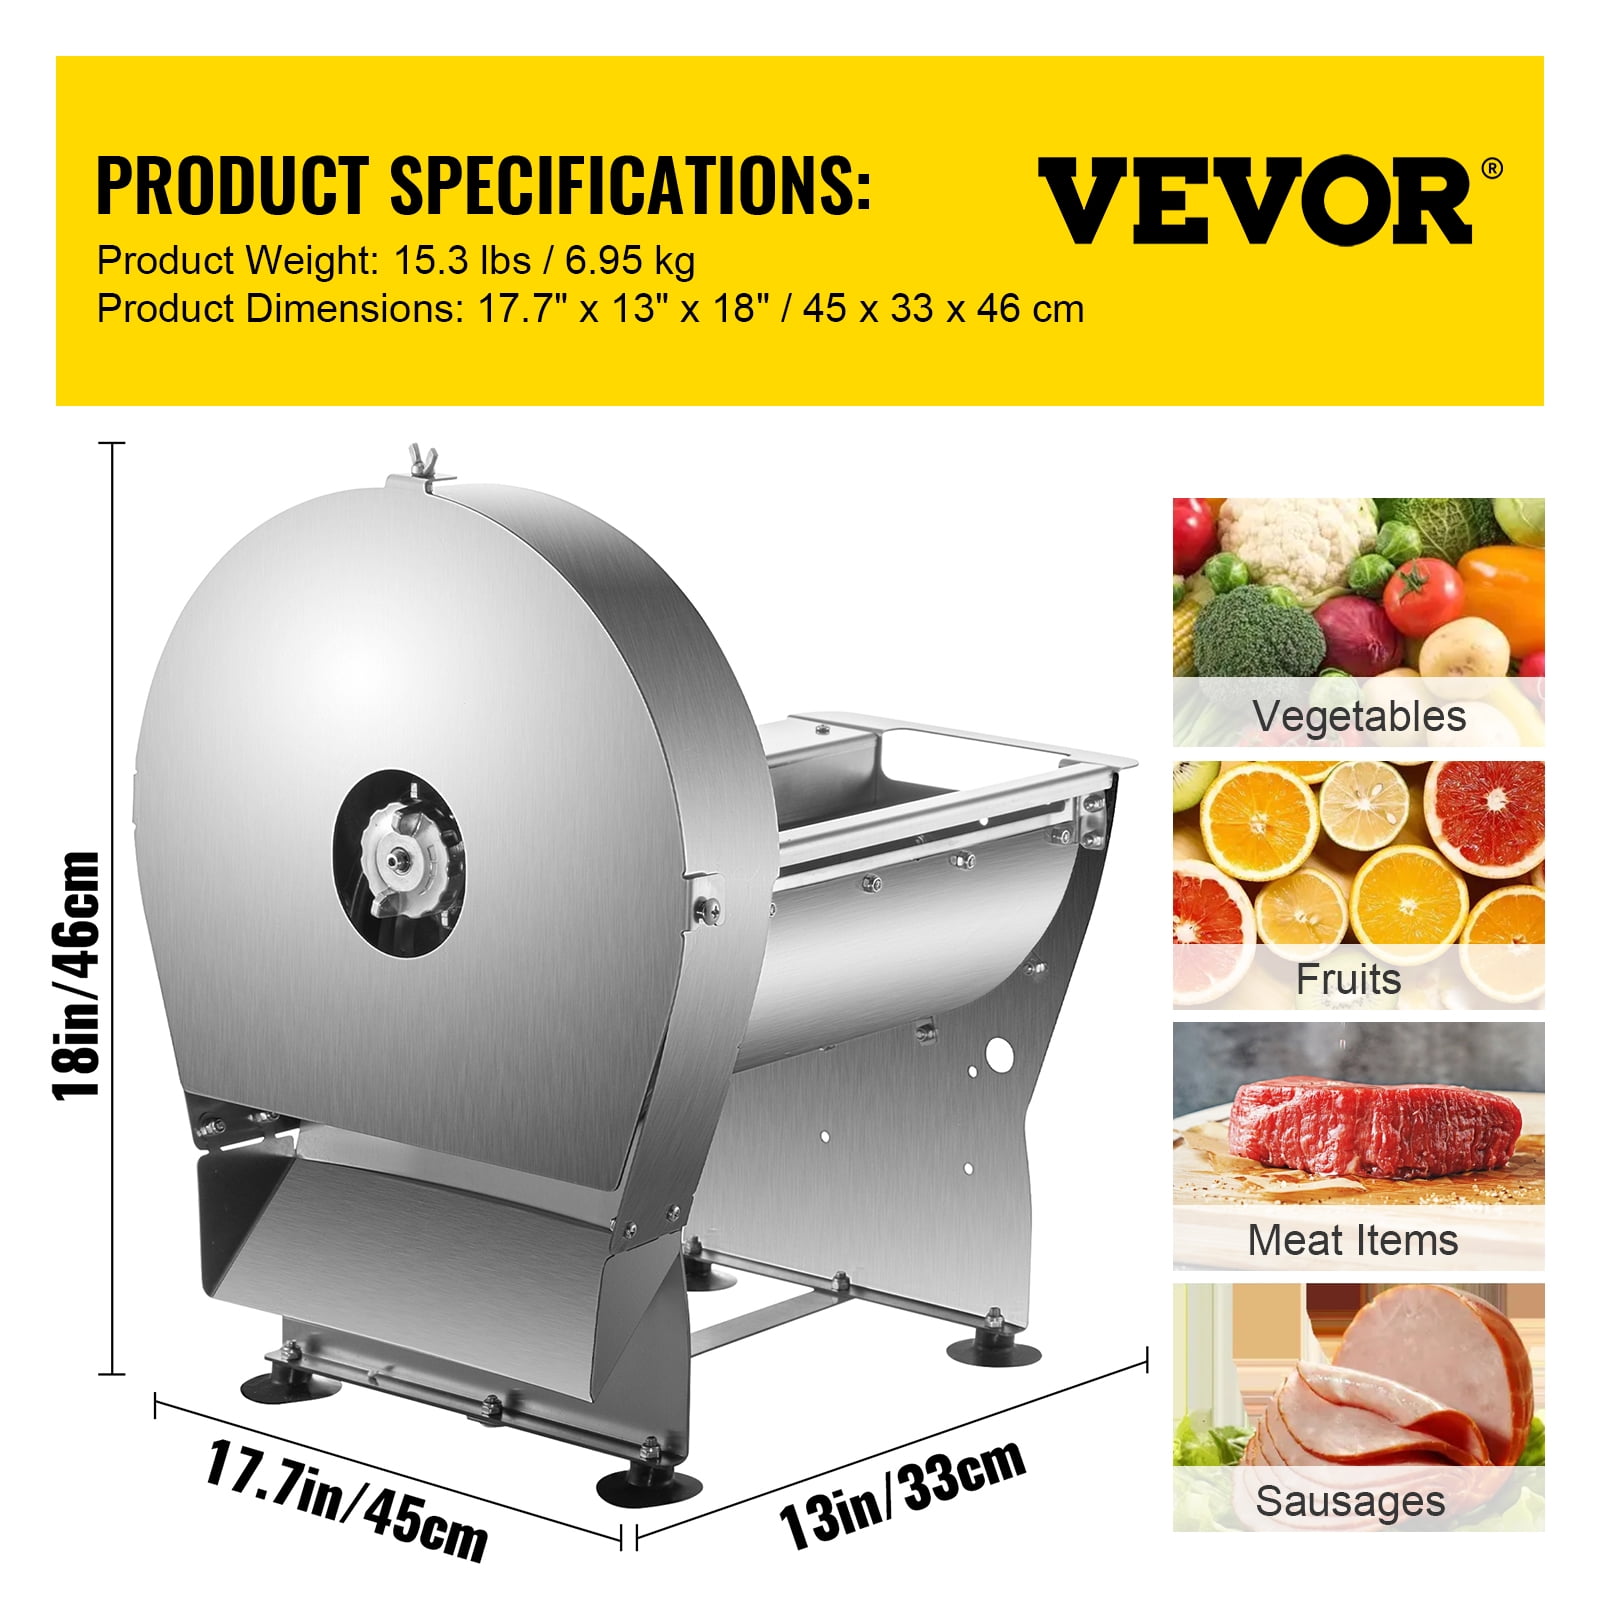 VEVOR Food Dehydrator Machine w/10 Stainless Steel Trays, 800-Watts Silver  Food Dryer w/Adjustable Temperature, FDA Listed SPF100548800WDQGIV1 - The  Home Depot